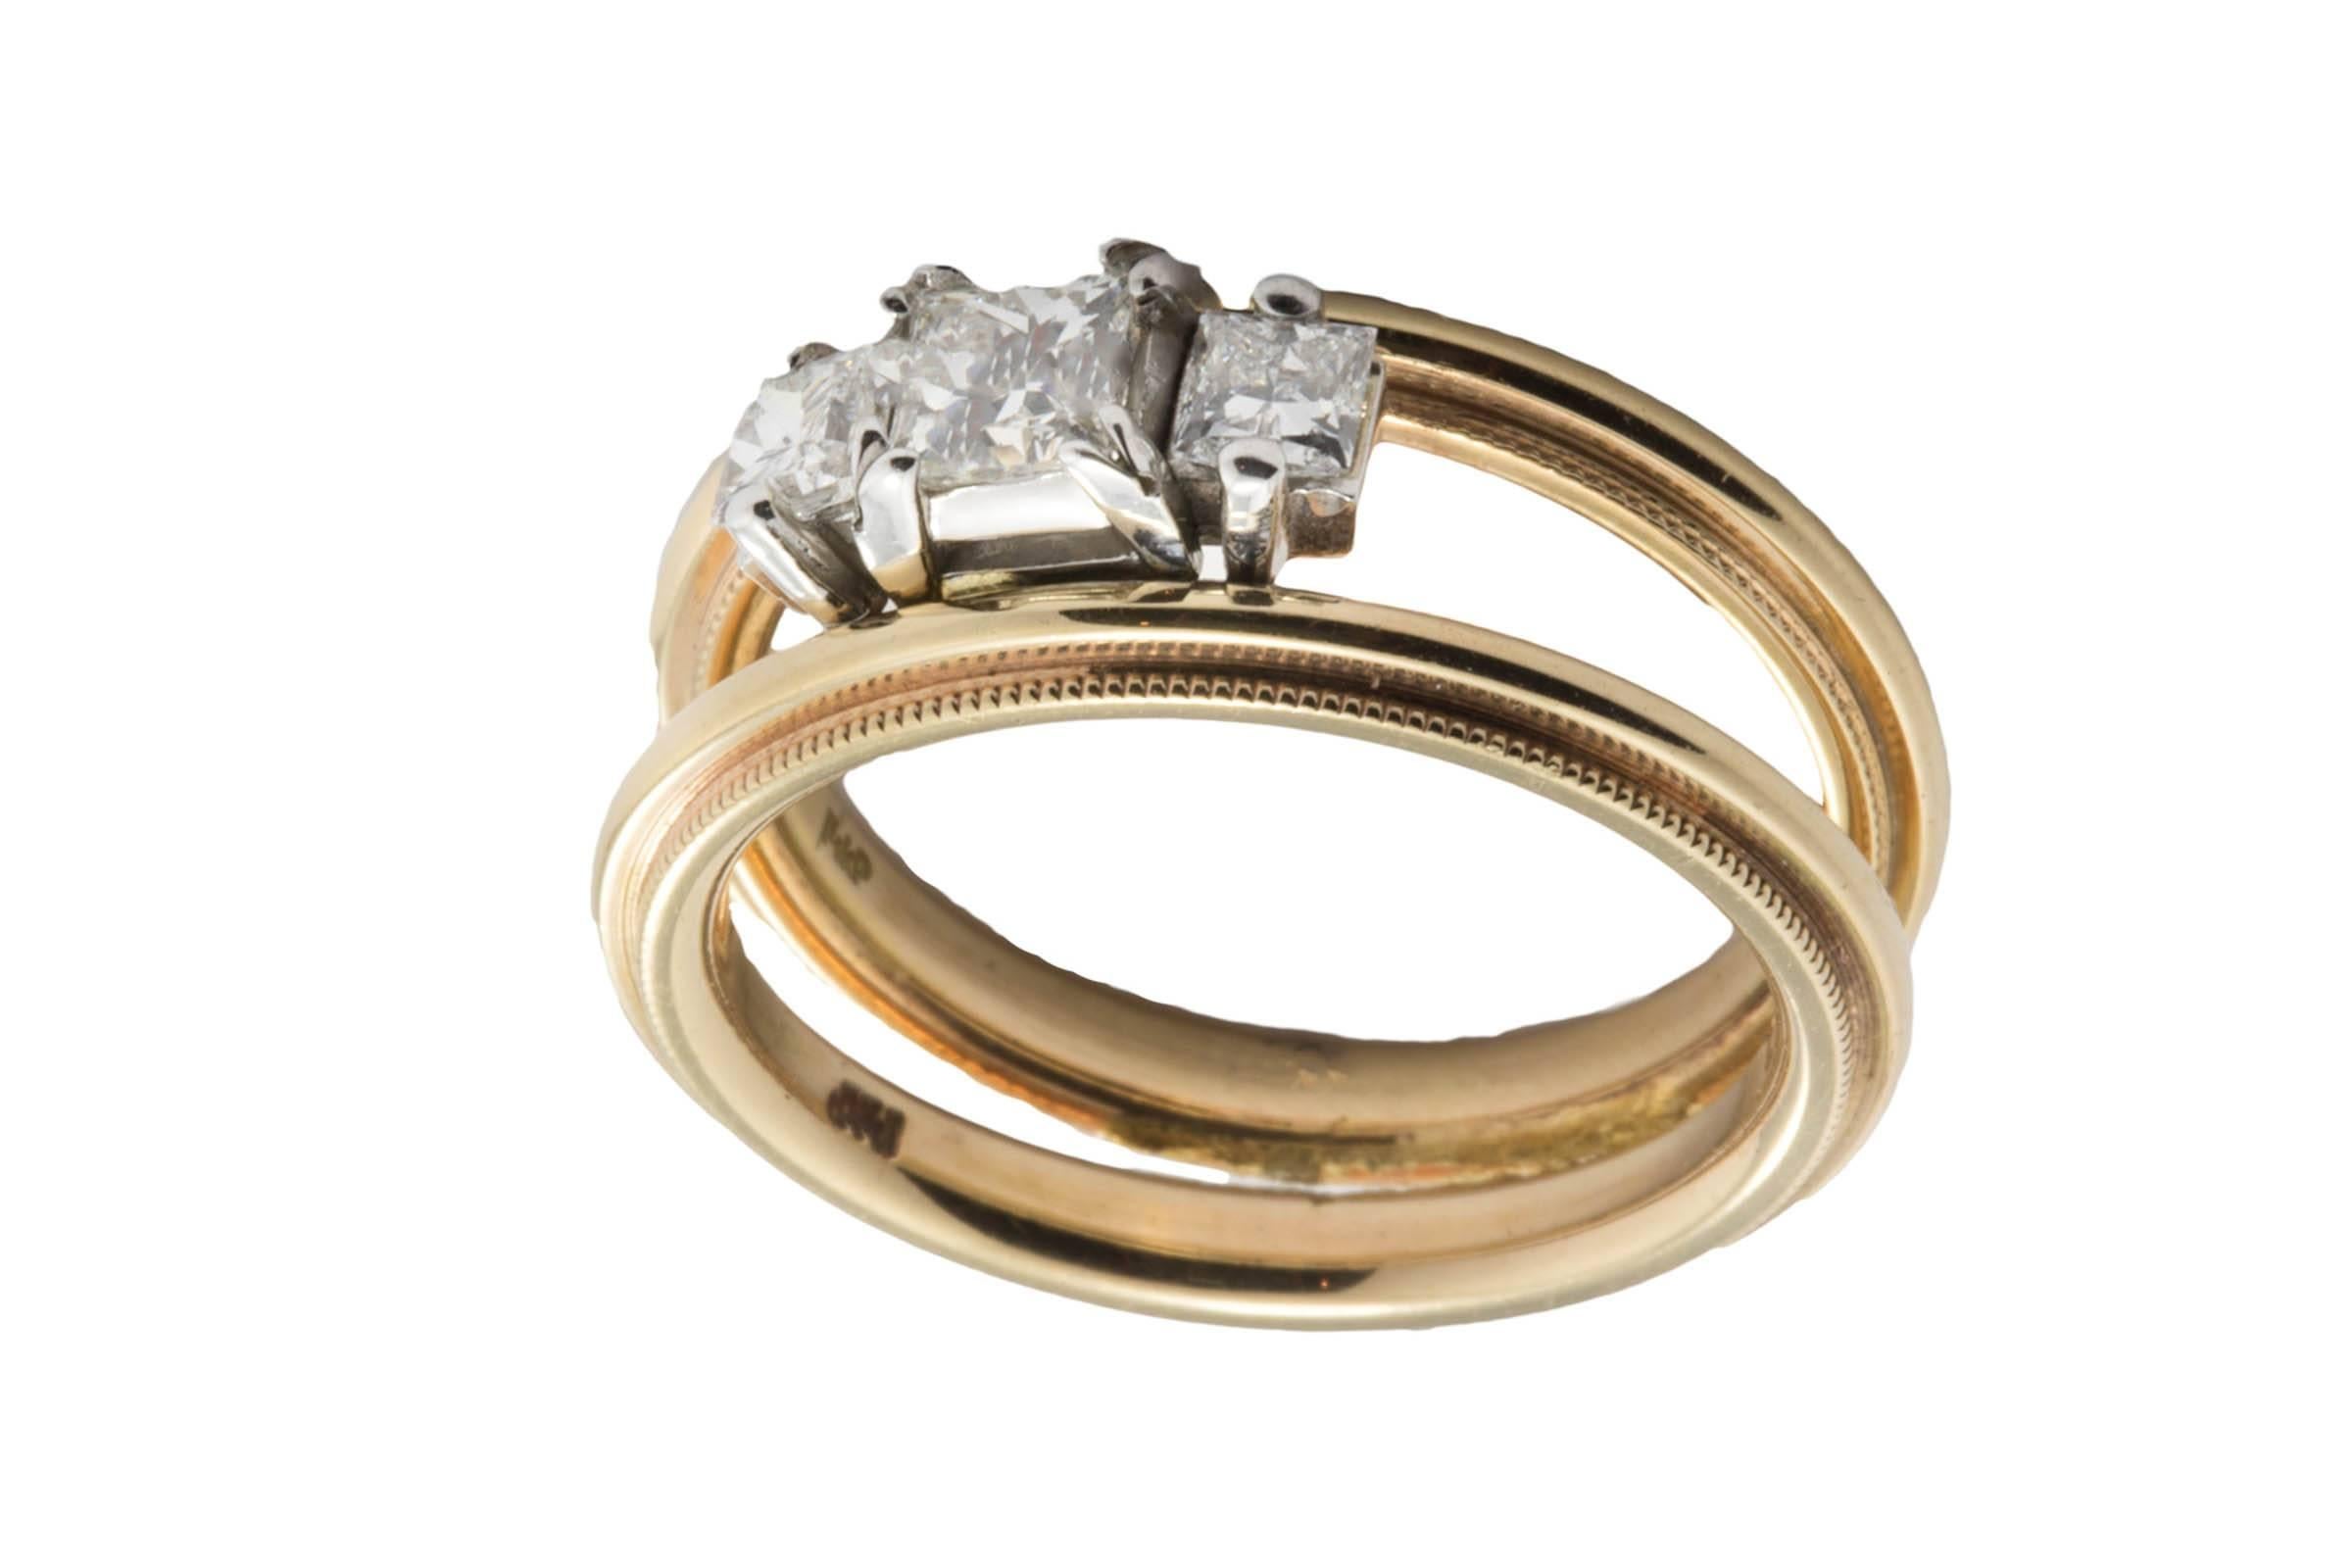 14K rose gold double band contains 3 princess cut diamonds weighing combined 0.67 carat, G color, VS clarity. The diamonds are set in white gold prongs.
Size 6. Can be sized.